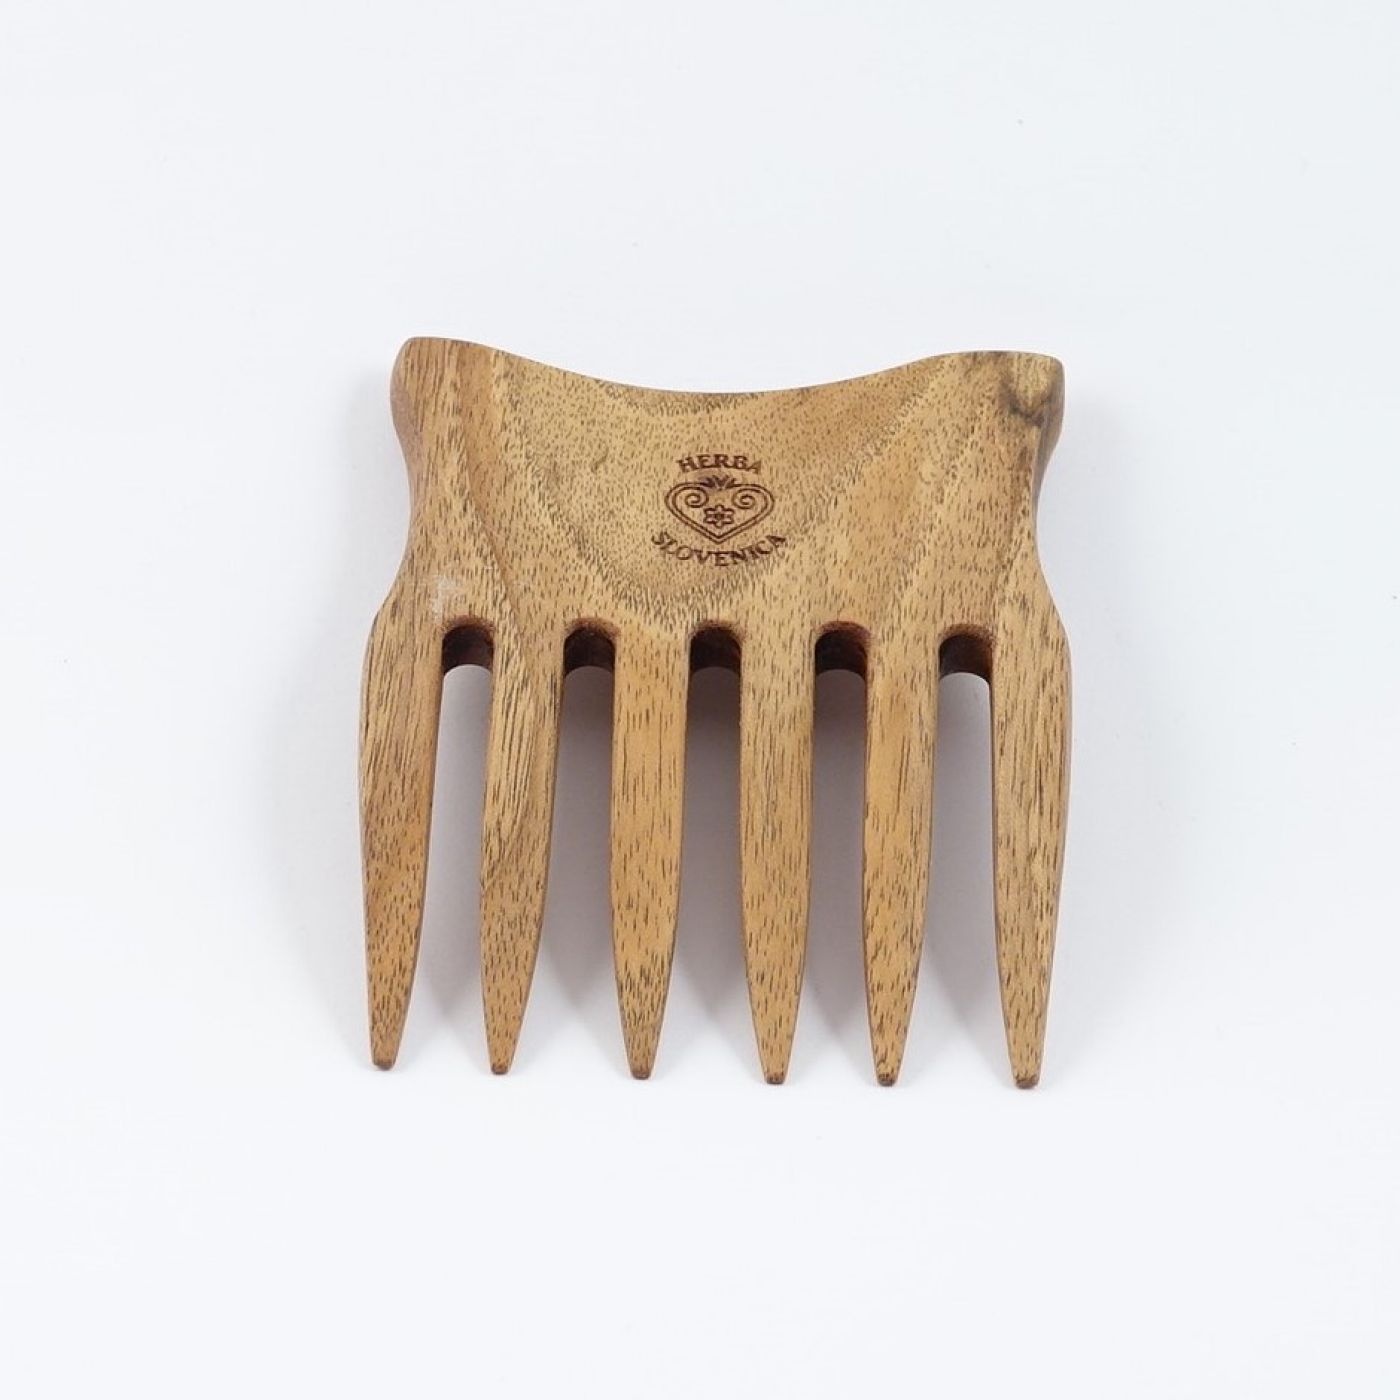 Wooden comb for curly hair without handle